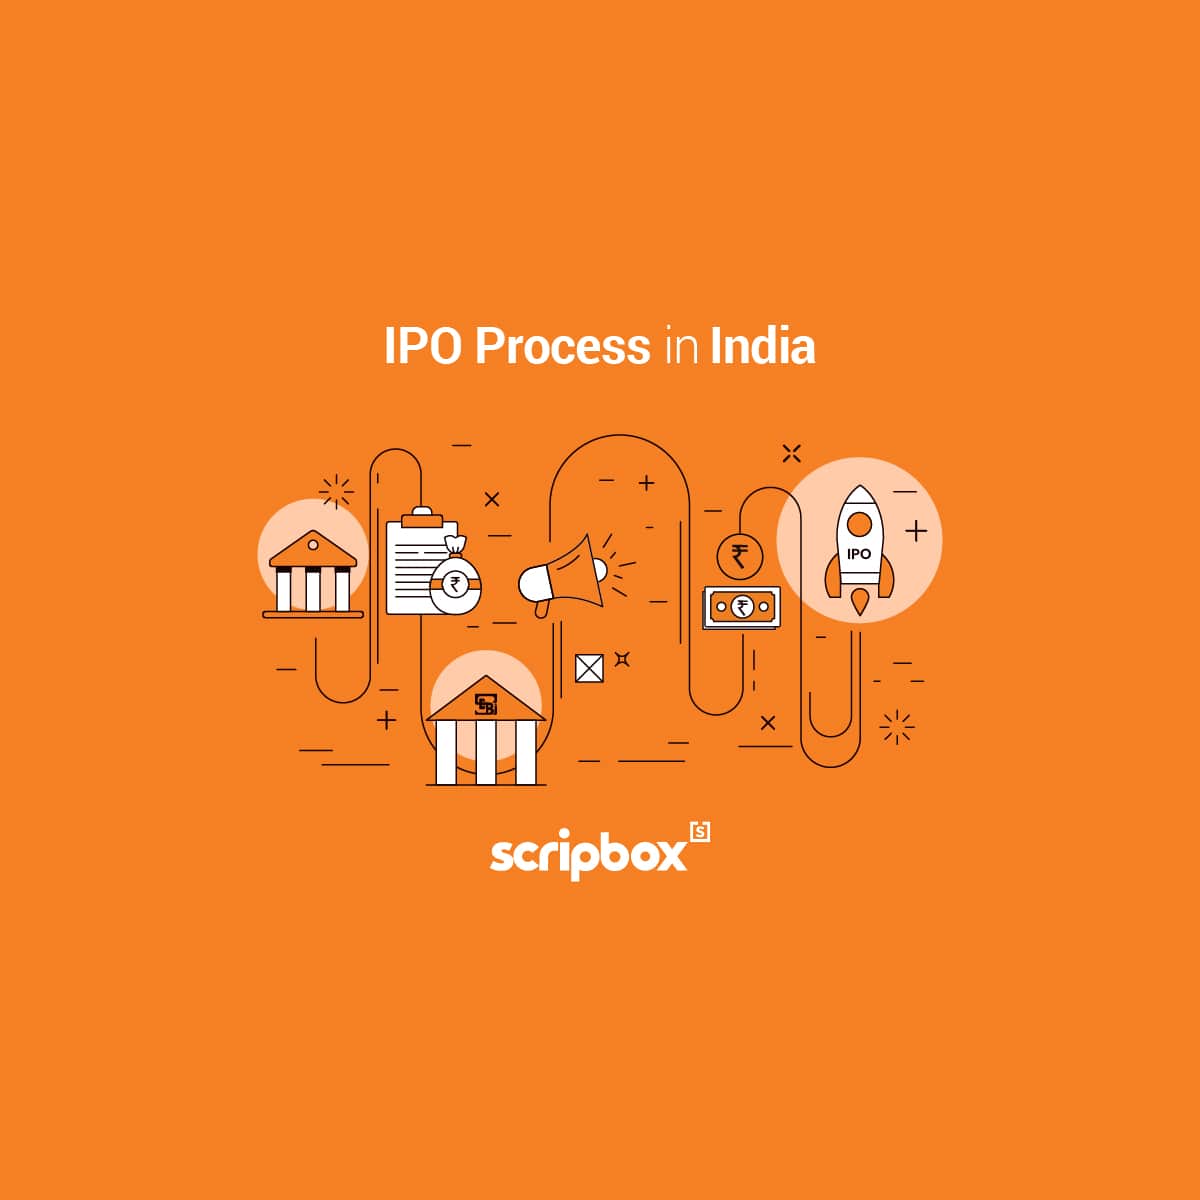 ipo process in india